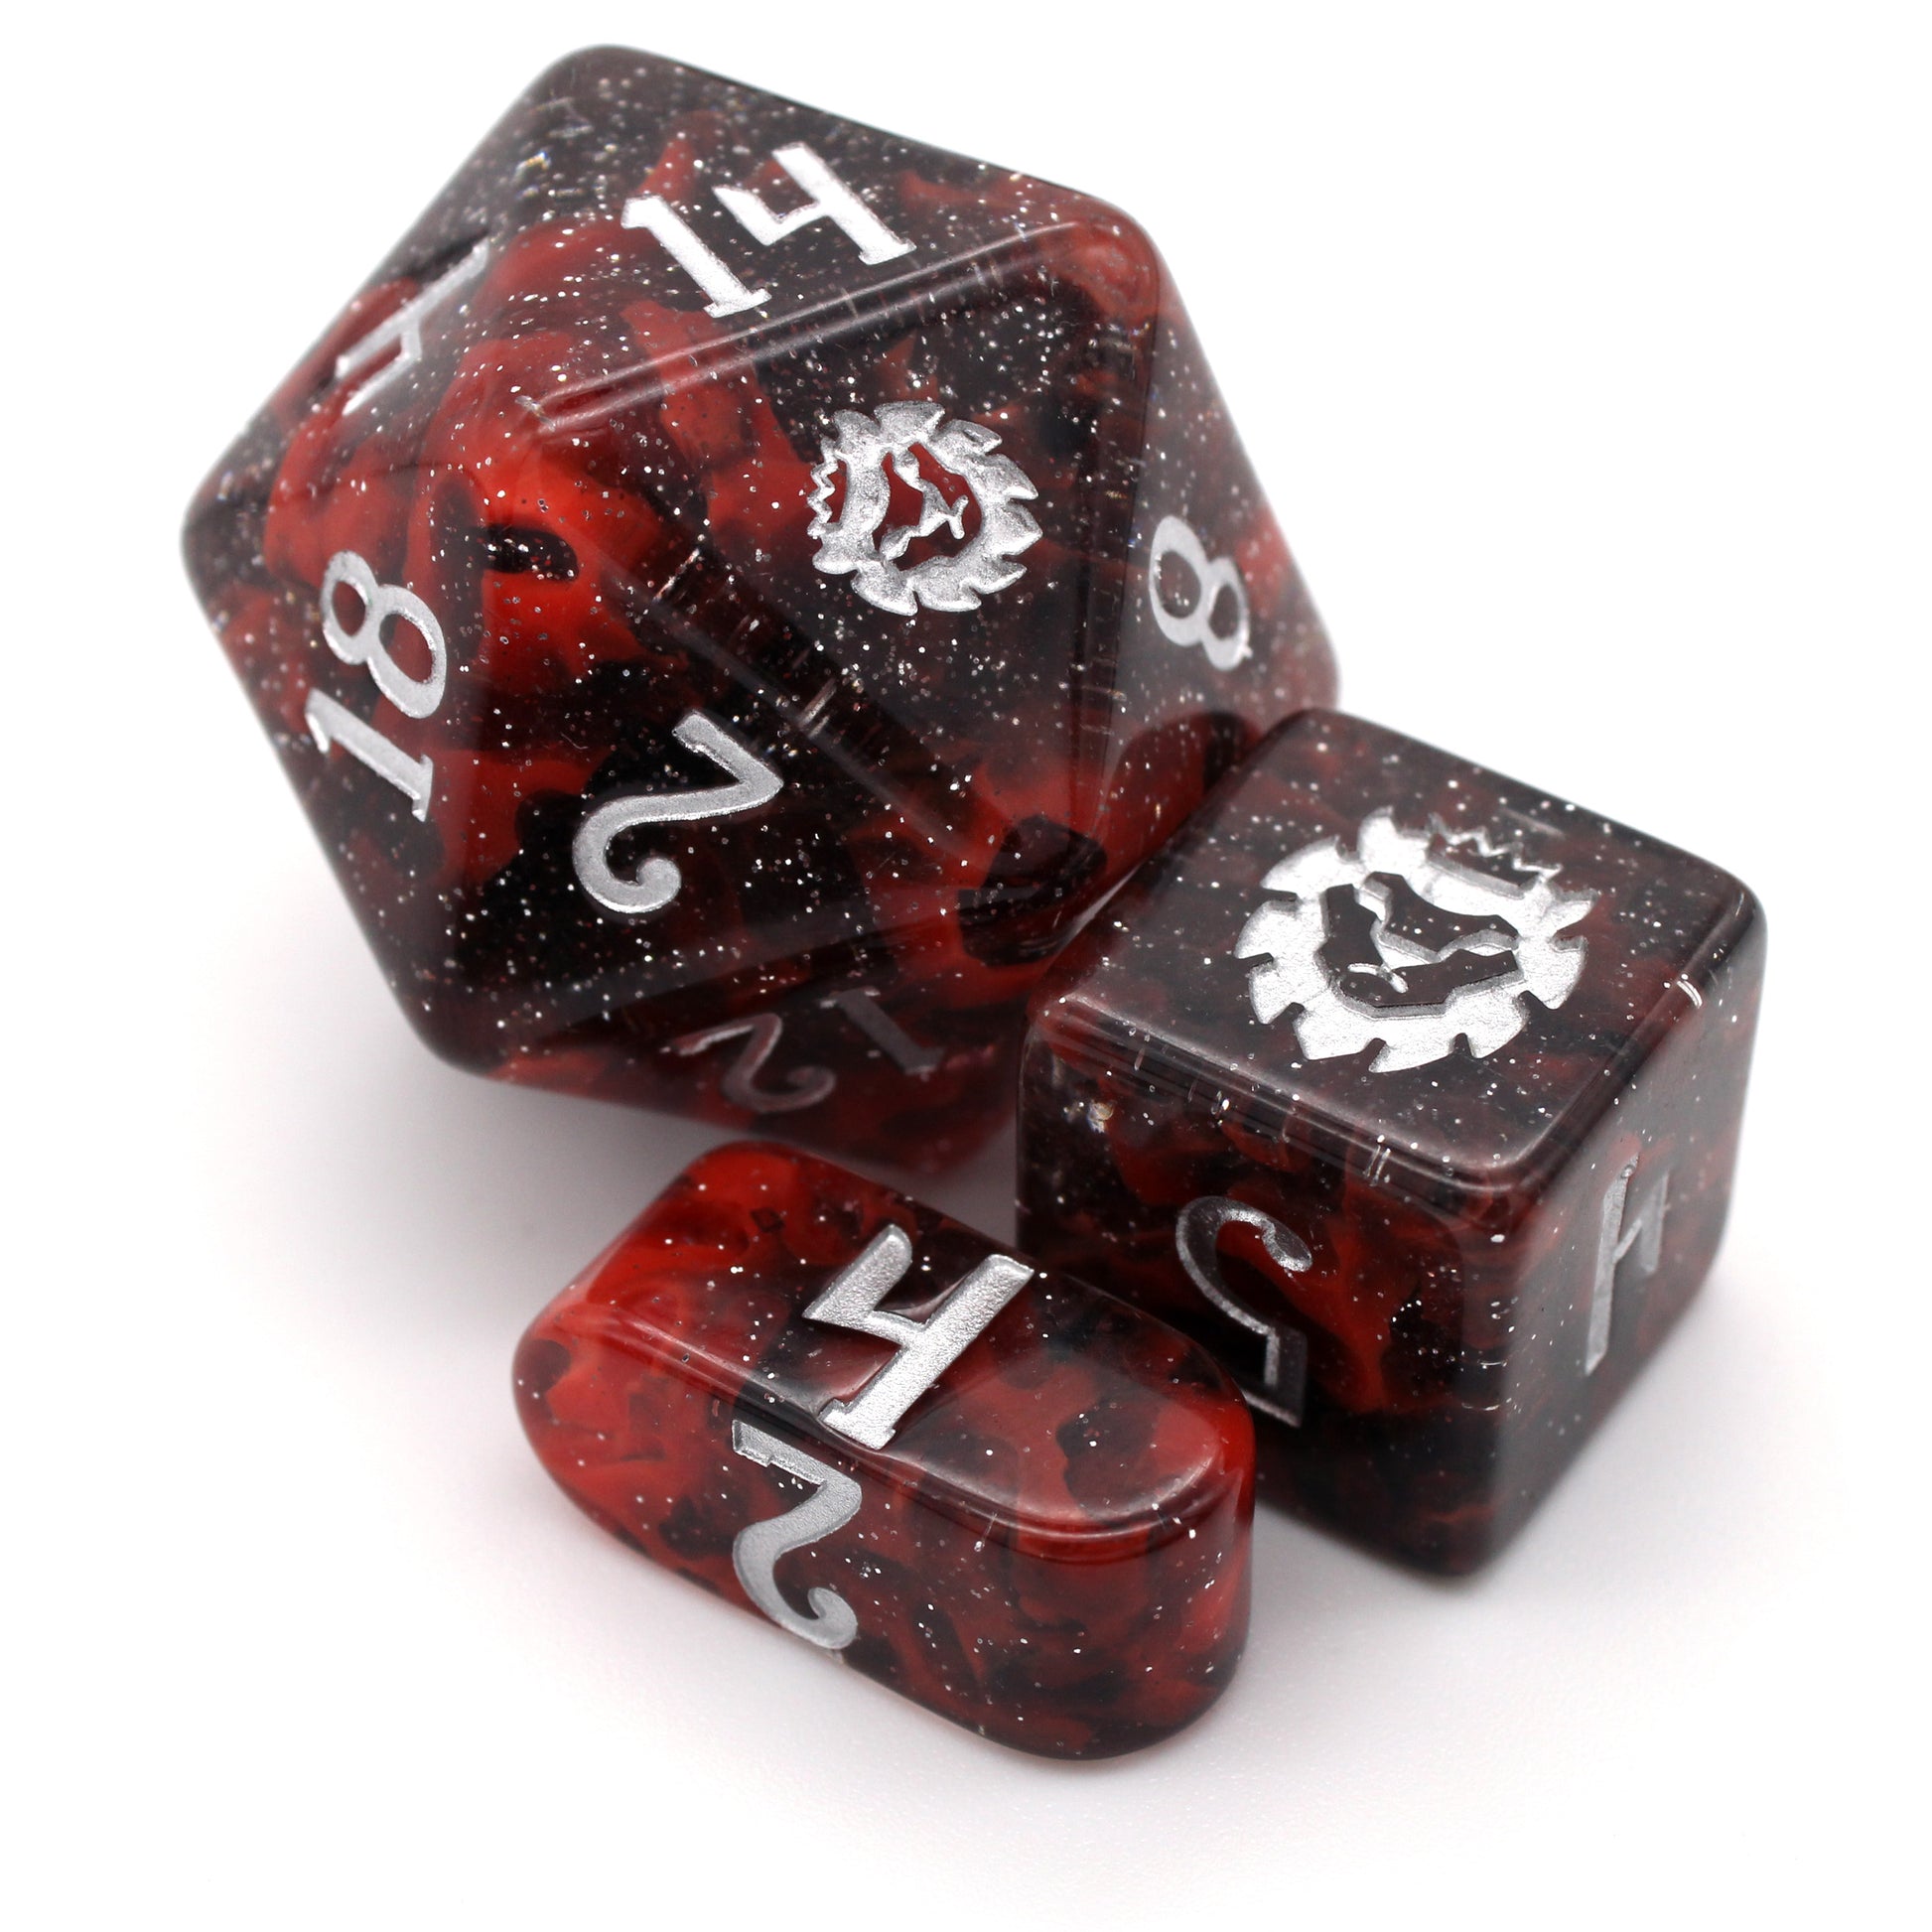 Carina Nebula is a marvel of astronomical beauty with swirls of opaque red and glittery translucent black resin that give amazing depth and unique patterning to each set of silver inked dice!